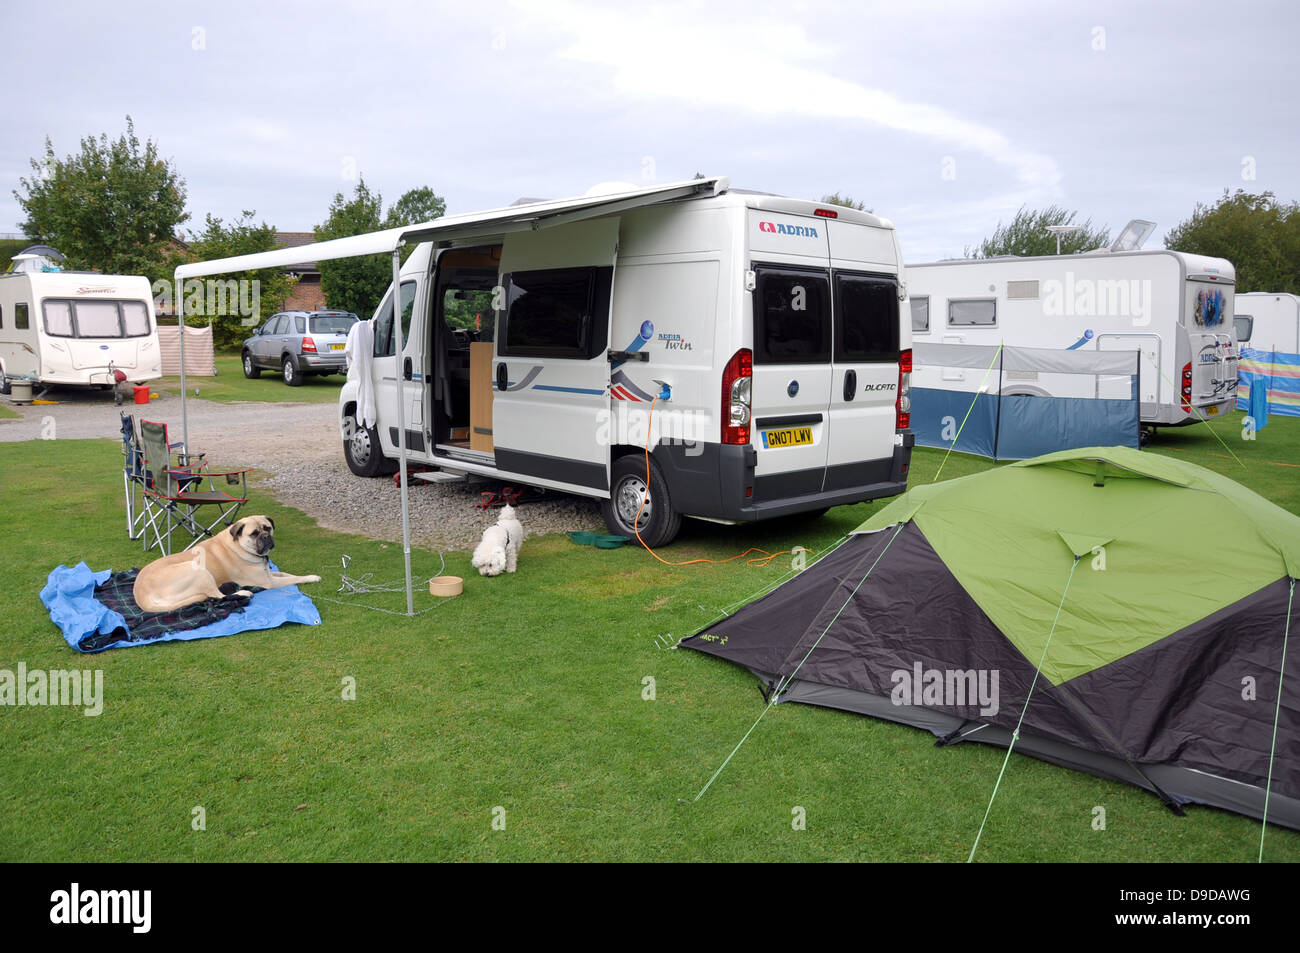 A motorhome, tent and dogs on their camping pitch in Sussex, England, UK. Caravans in the background. Stock Photo